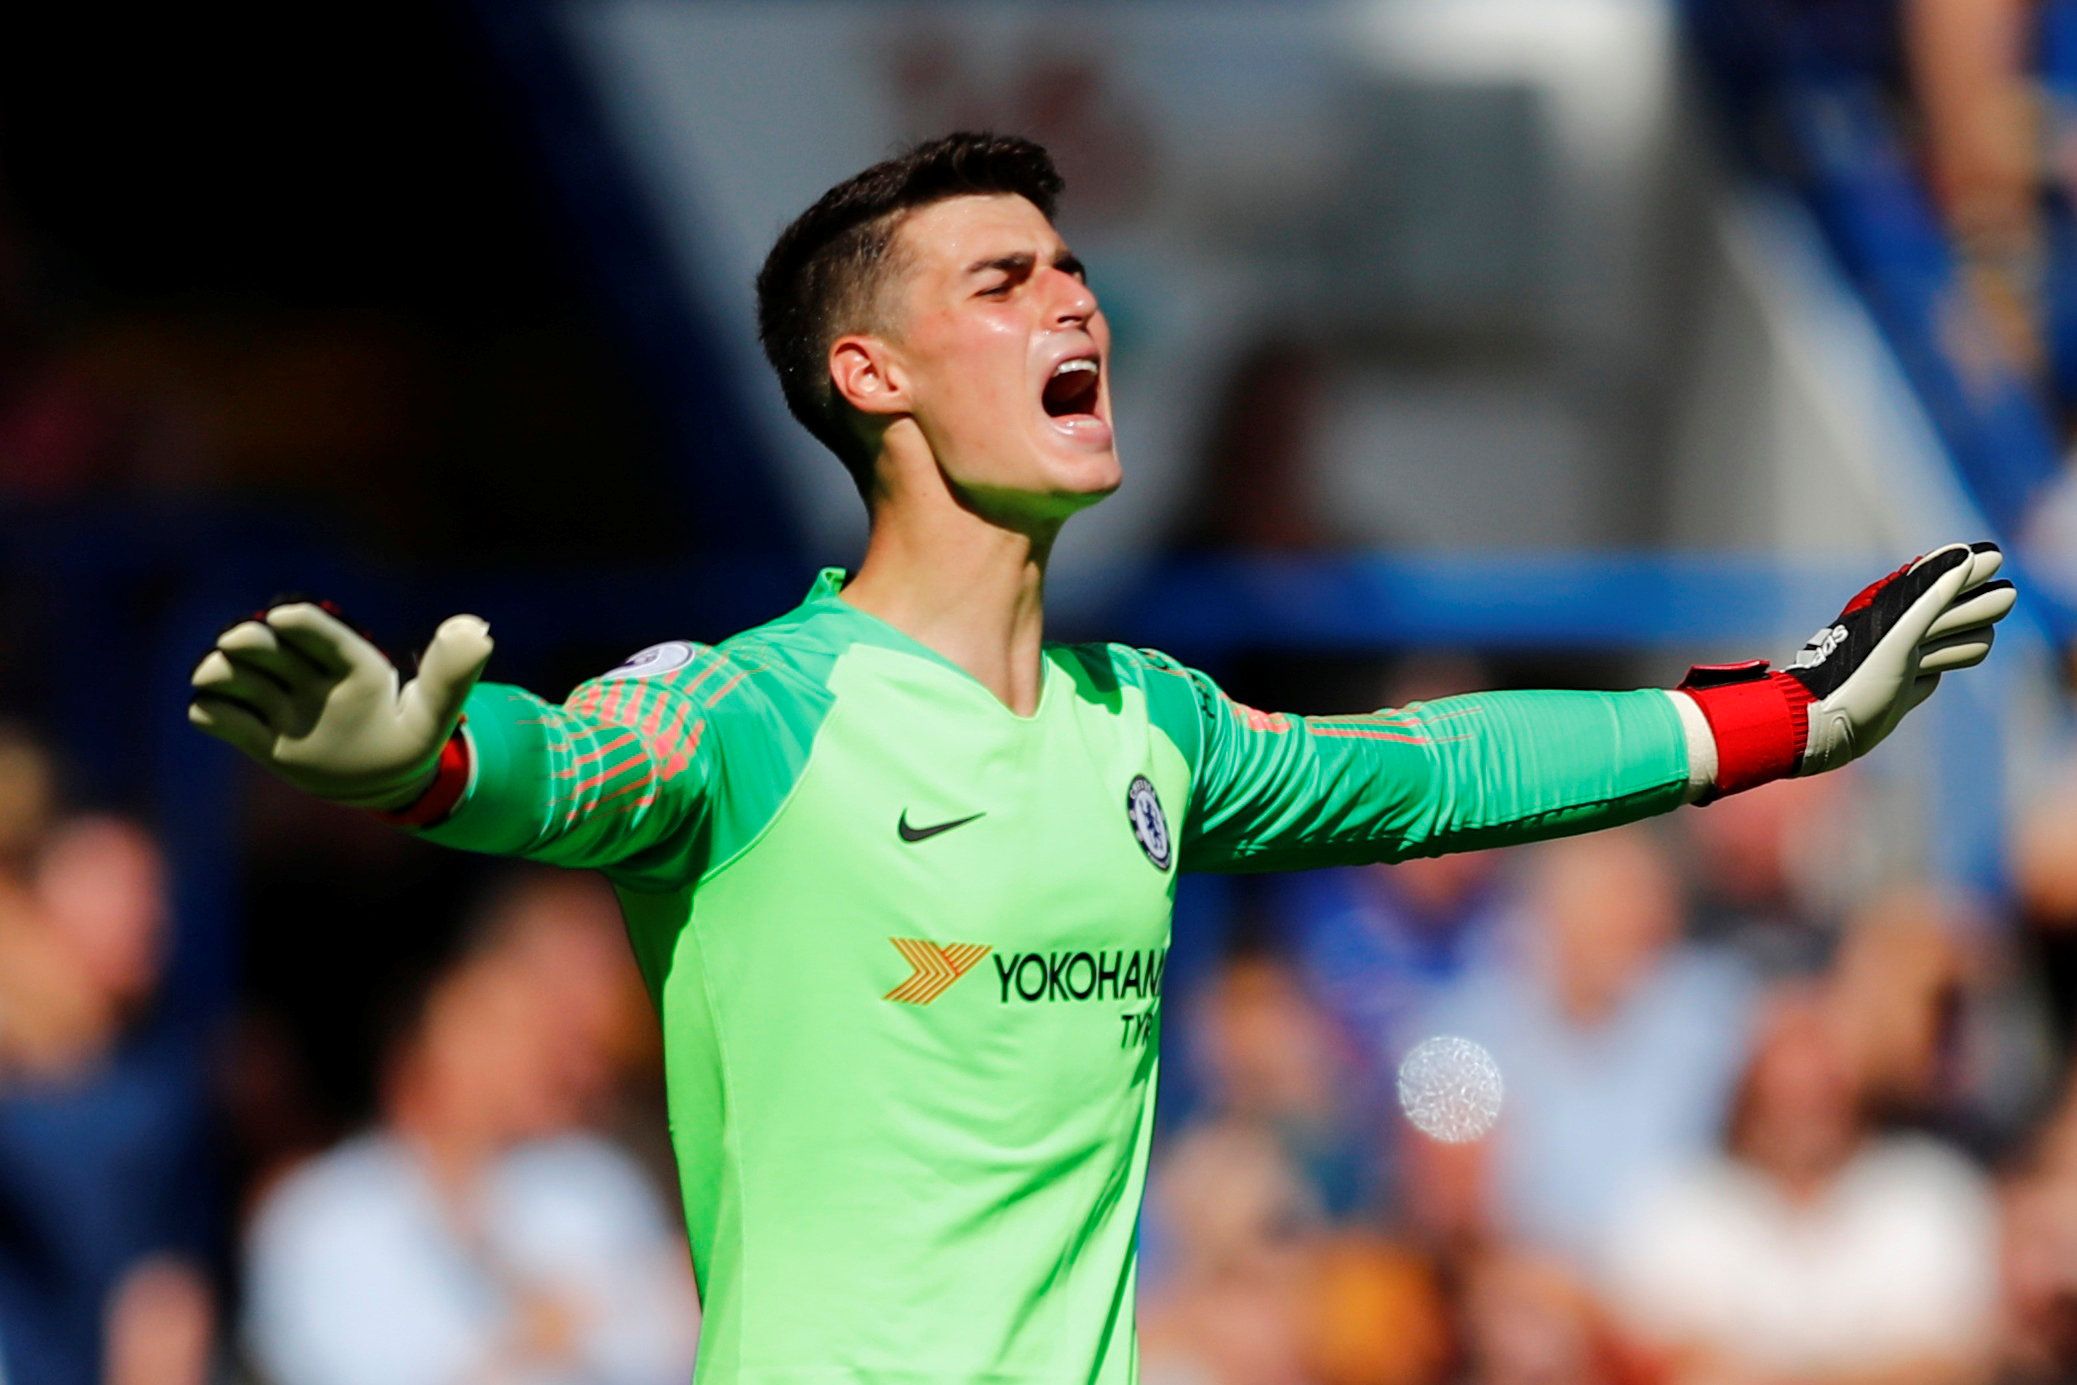 Soccer Football - Premier League - Chelsea v AFC Bournemouth - Stamford Bridge, London, Britain - September 1, 2018  Chelsea's Kepa Arrizabalaga during the match     REUTERS/Eddie Keogh  EDITORIAL USE ONLY. No use with unauthorized audio, video, data, fixture lists, club/league logos or 